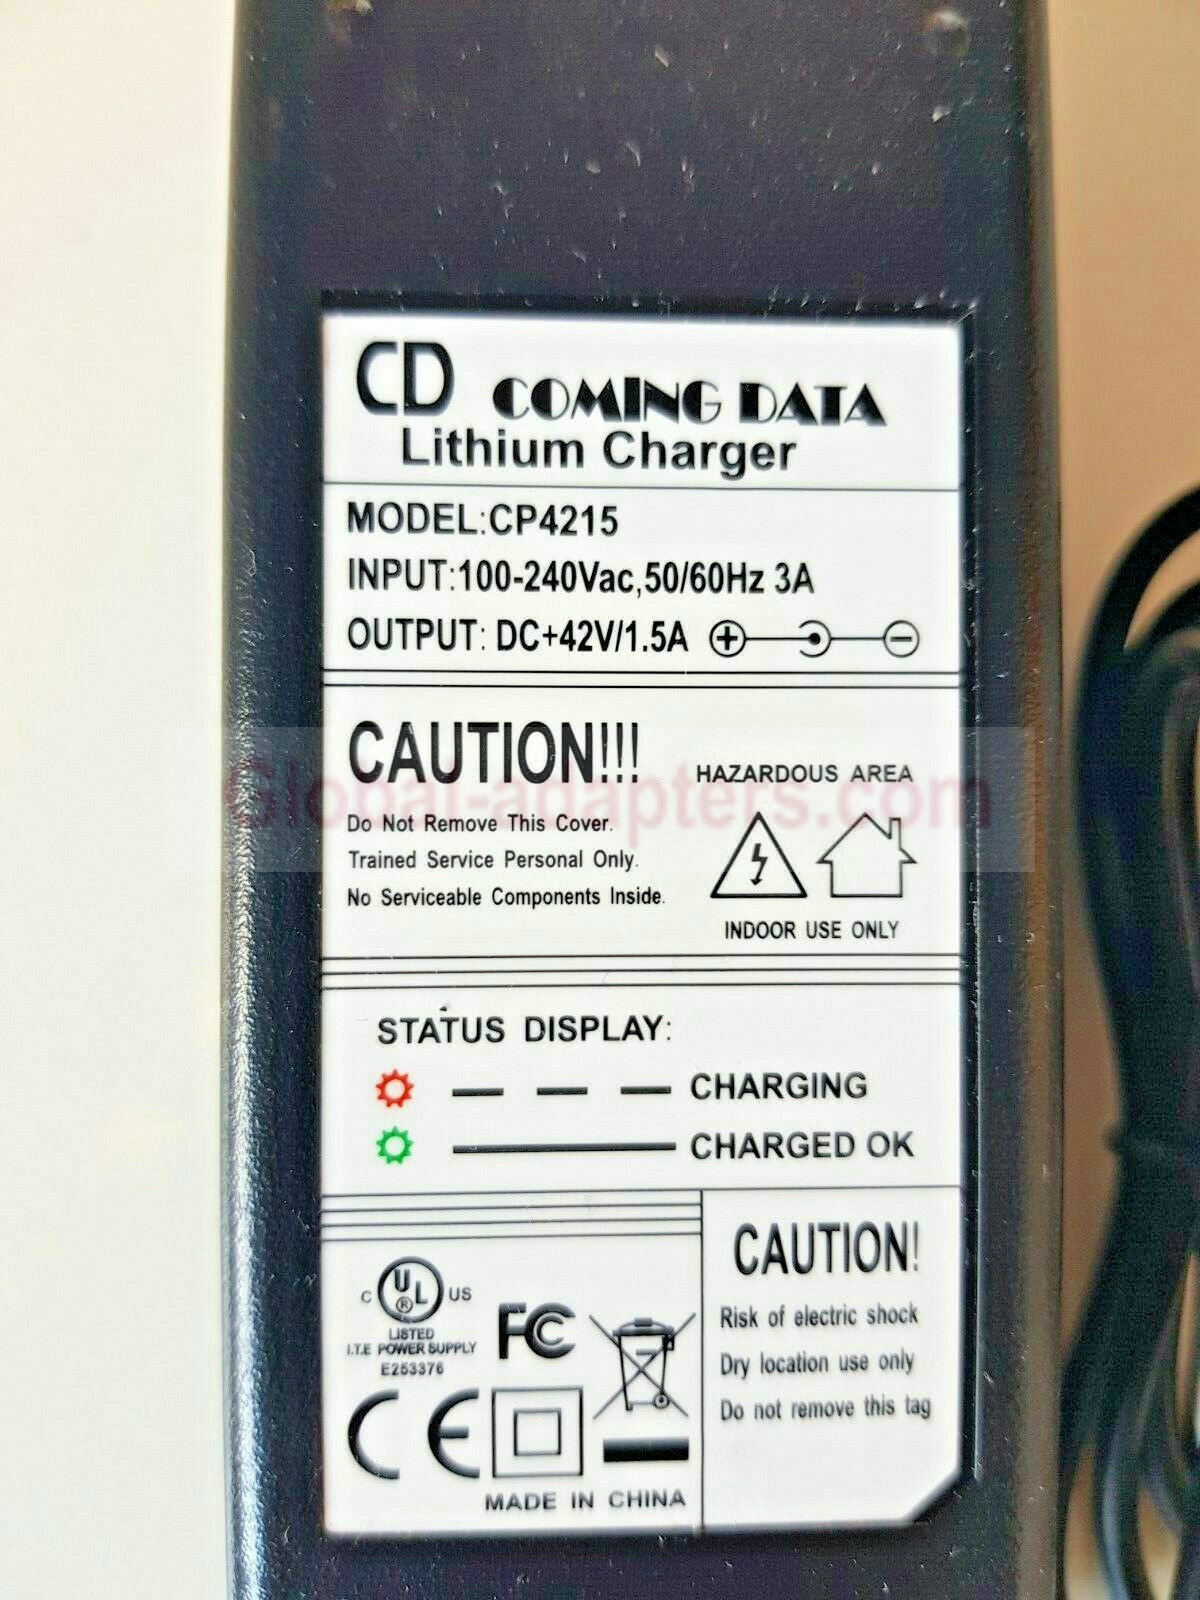 NEW 42V DC 1.5A COMING DATA LITHIUM CHARGER CP4215 CD-SCOOTER CHARGER BARREL CONNECT